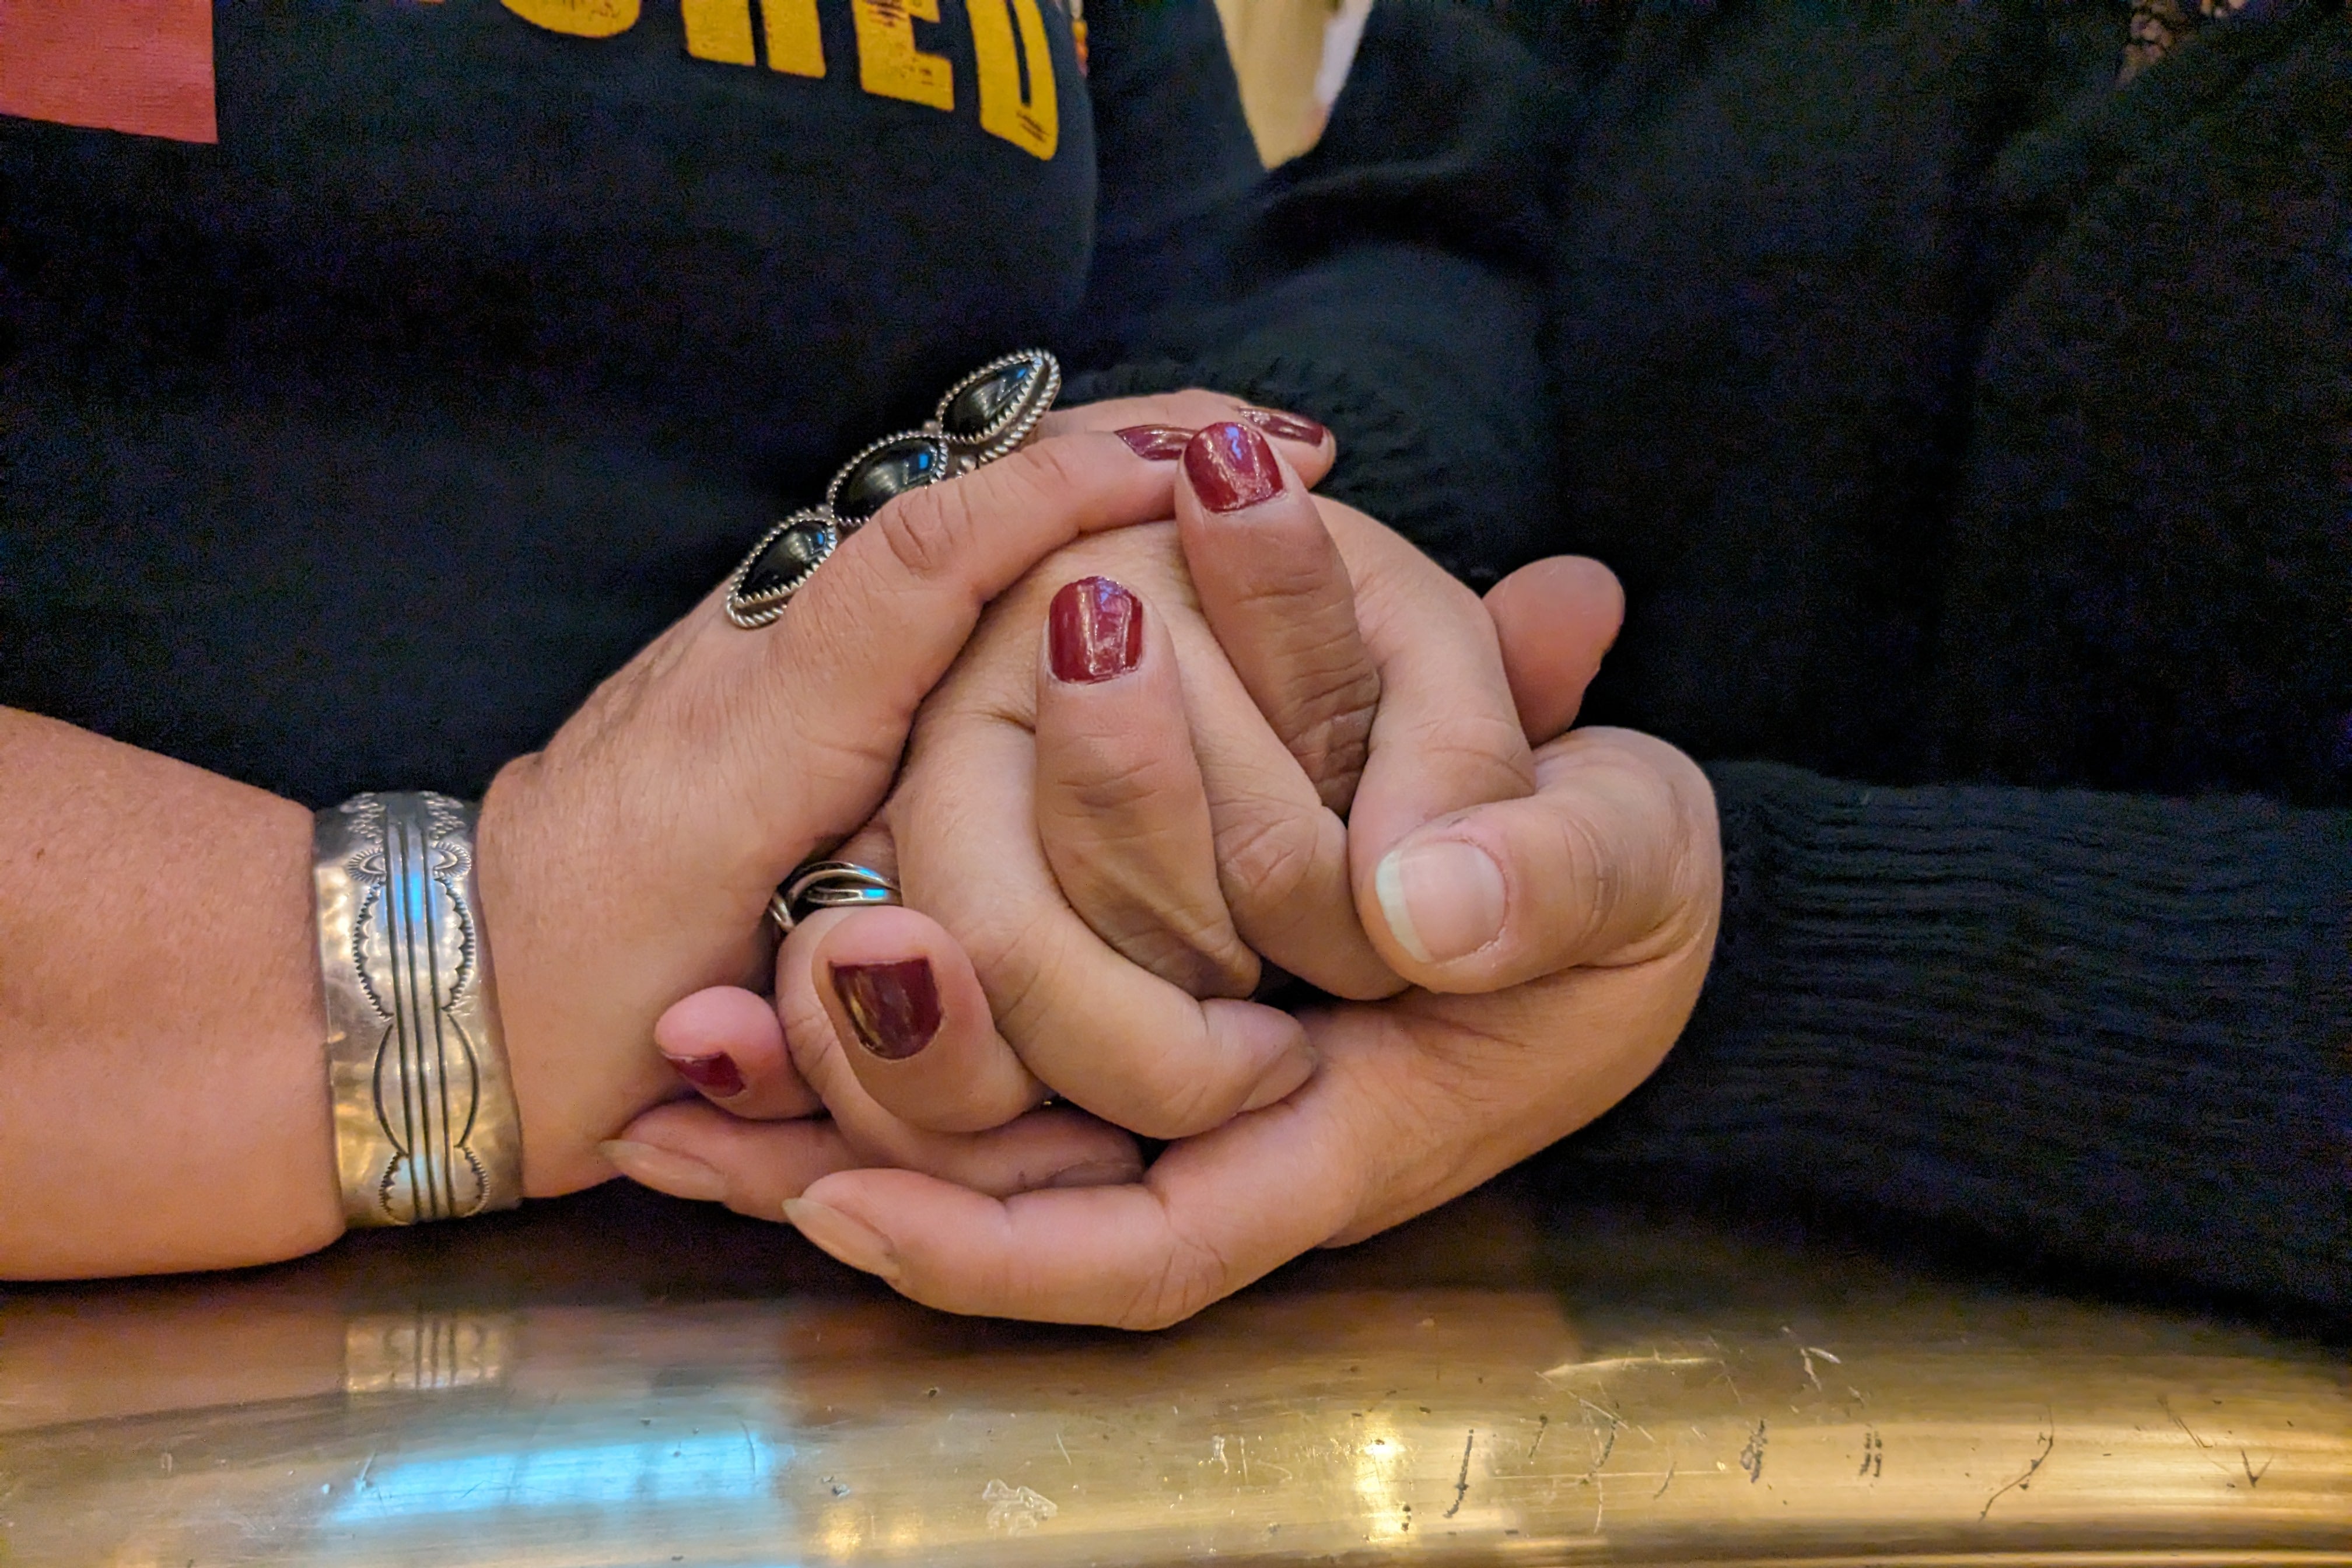 A close up of two people embracing hands. One pair has red nail polish and both people are wearing black shirts.